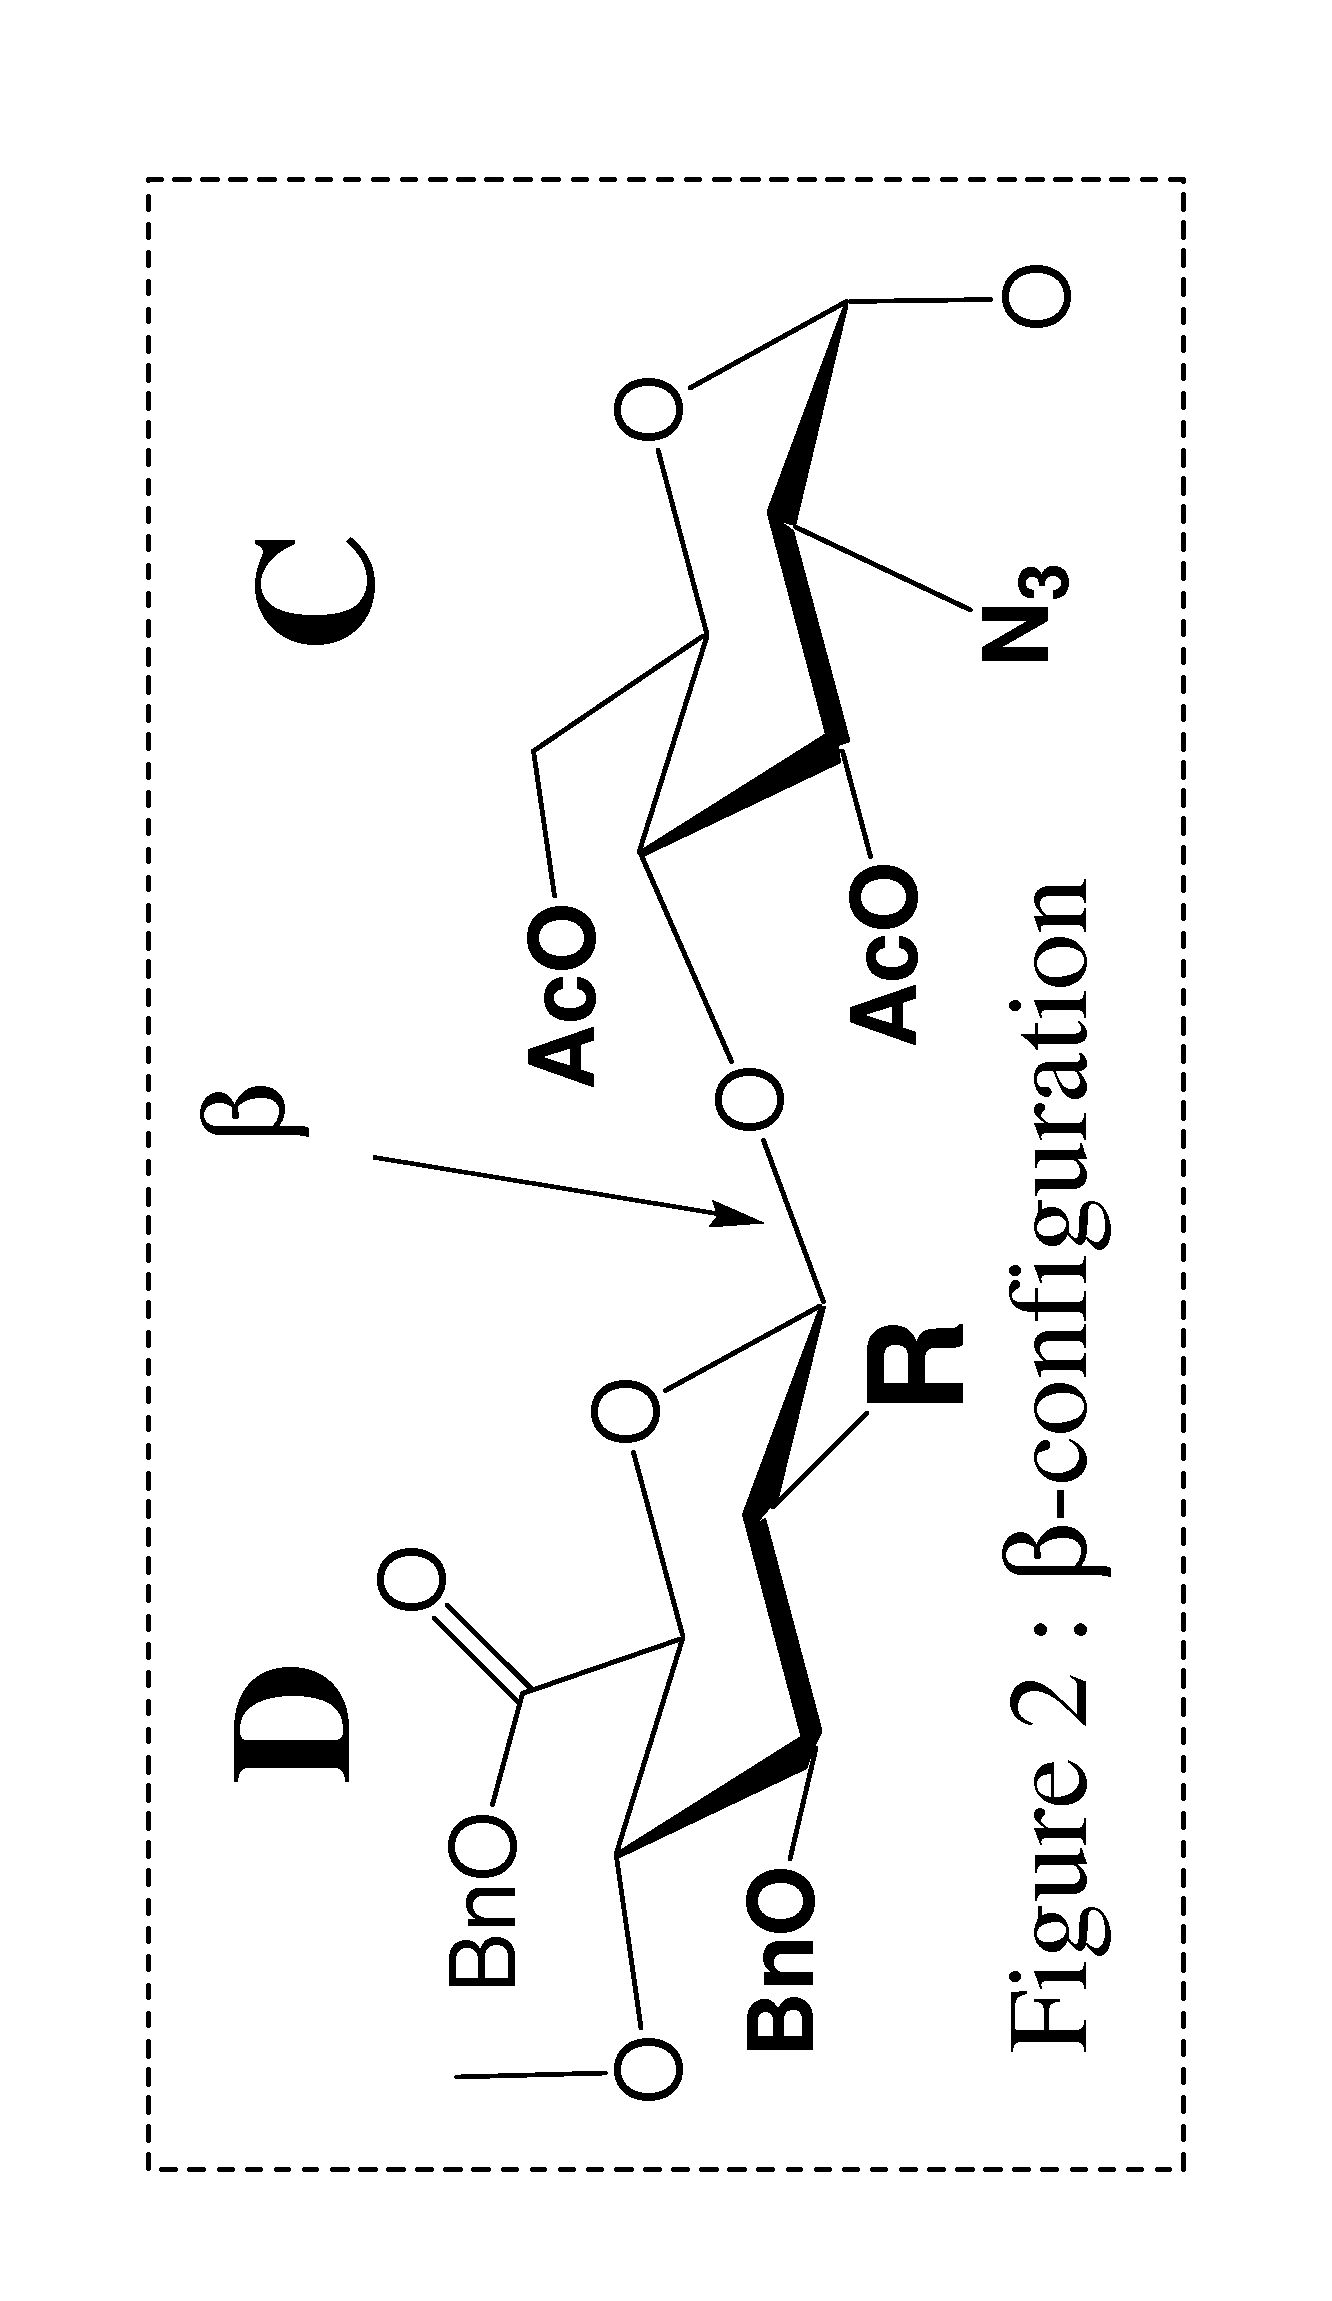 Process for perparing fondaparinux sodium and intermediates useful in the synthesis thereof